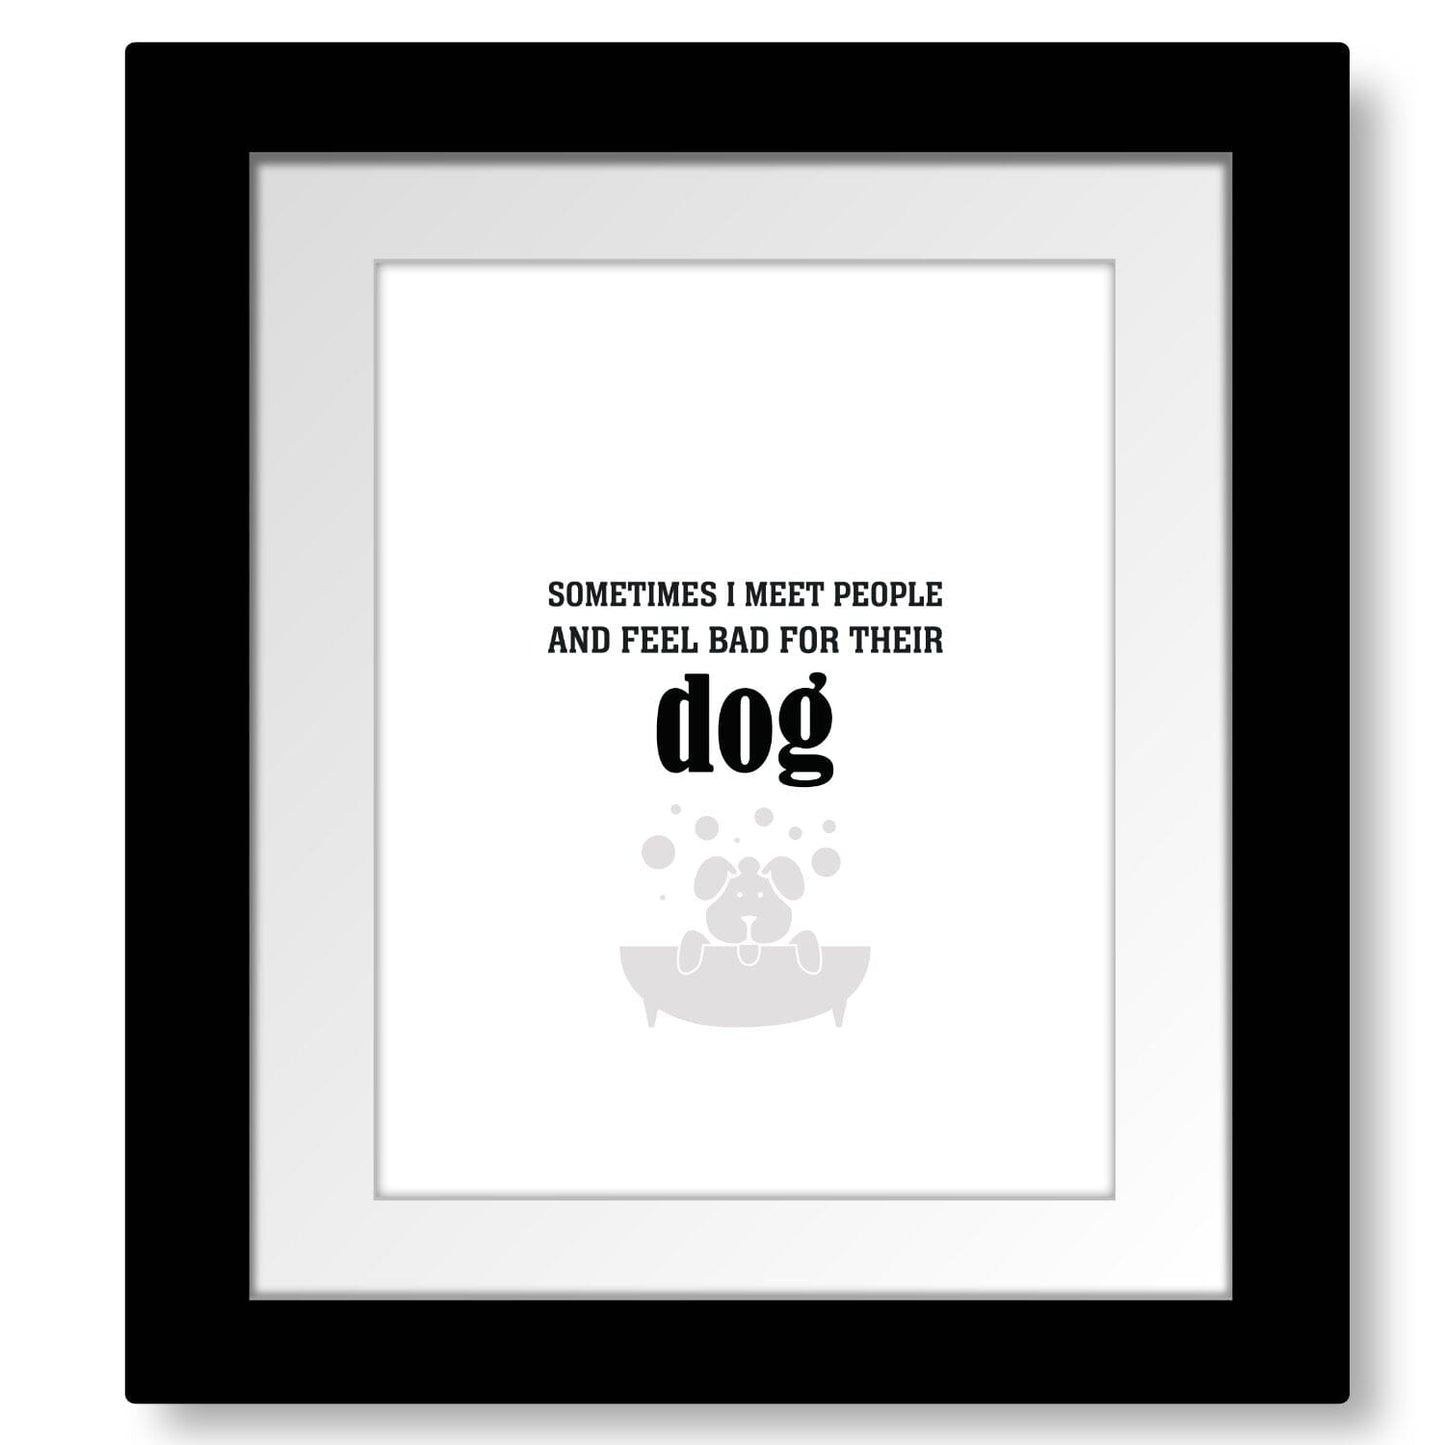 Sometimes I Meet People and Feel Bad for Their Dog Print Wise and Wiseass Quotes Song Lyrics Art 8x10 Framed and Matted Print 